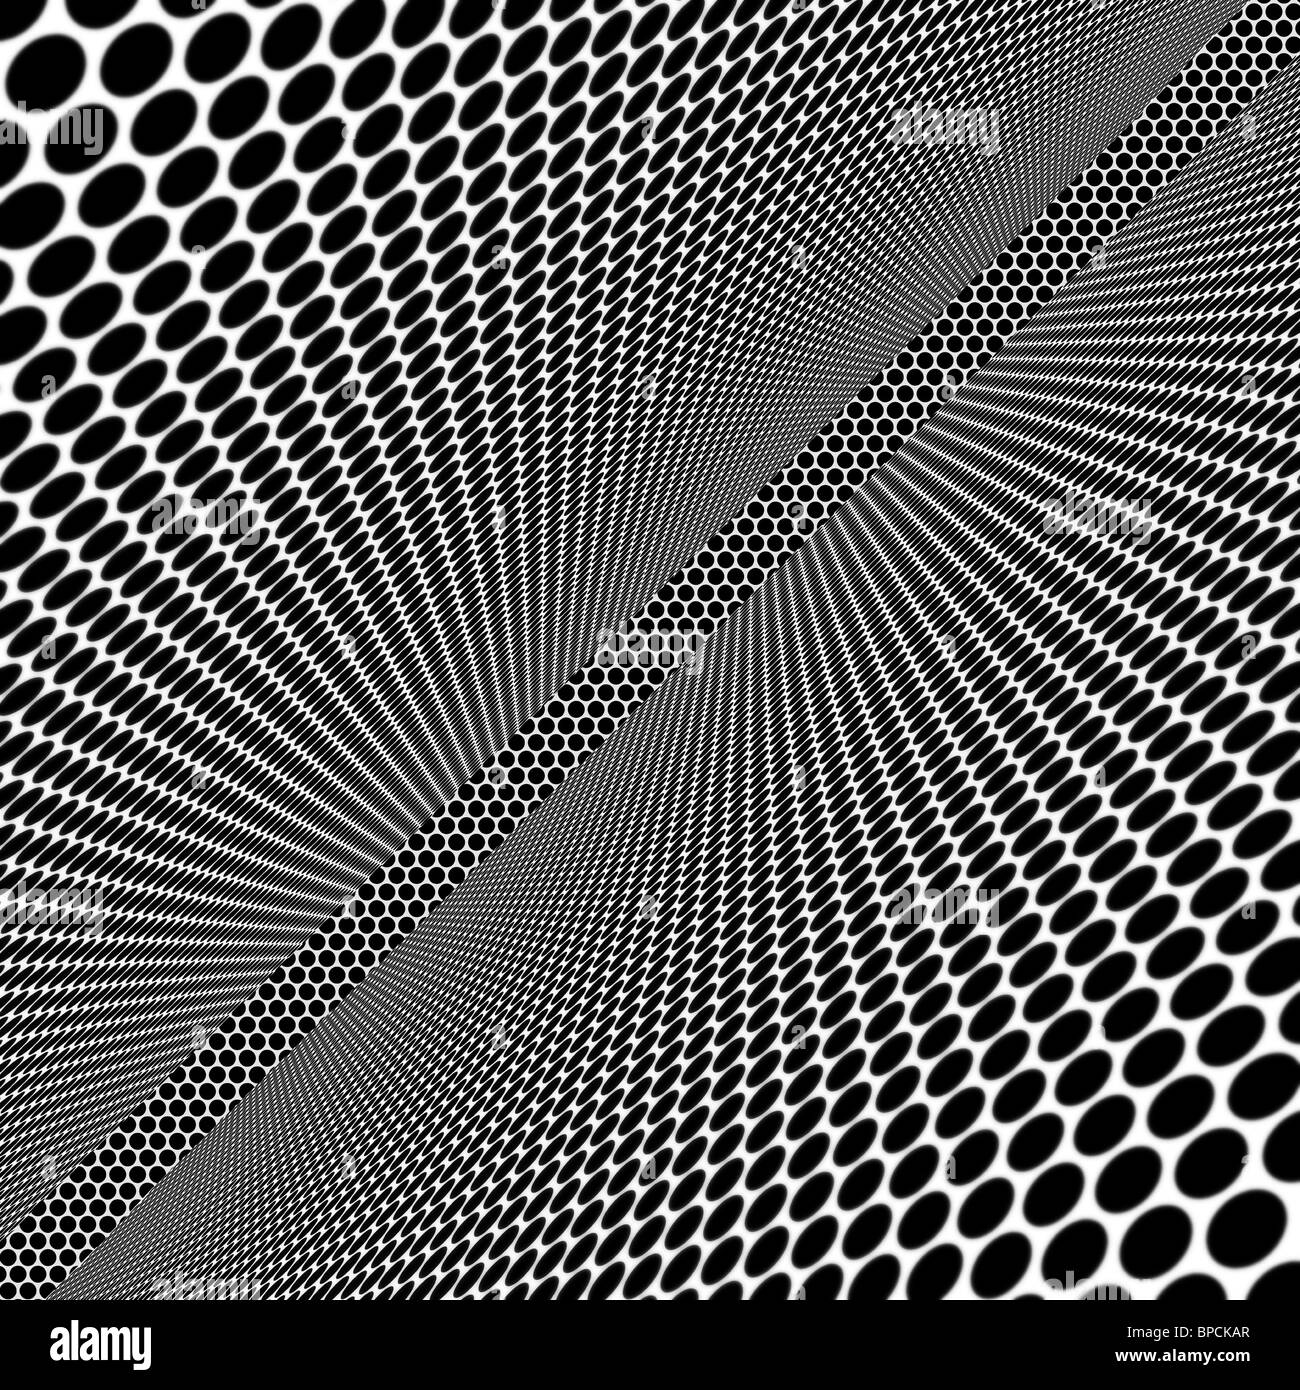 The abstract geometrical illustrated monochrome square background Stock Photo